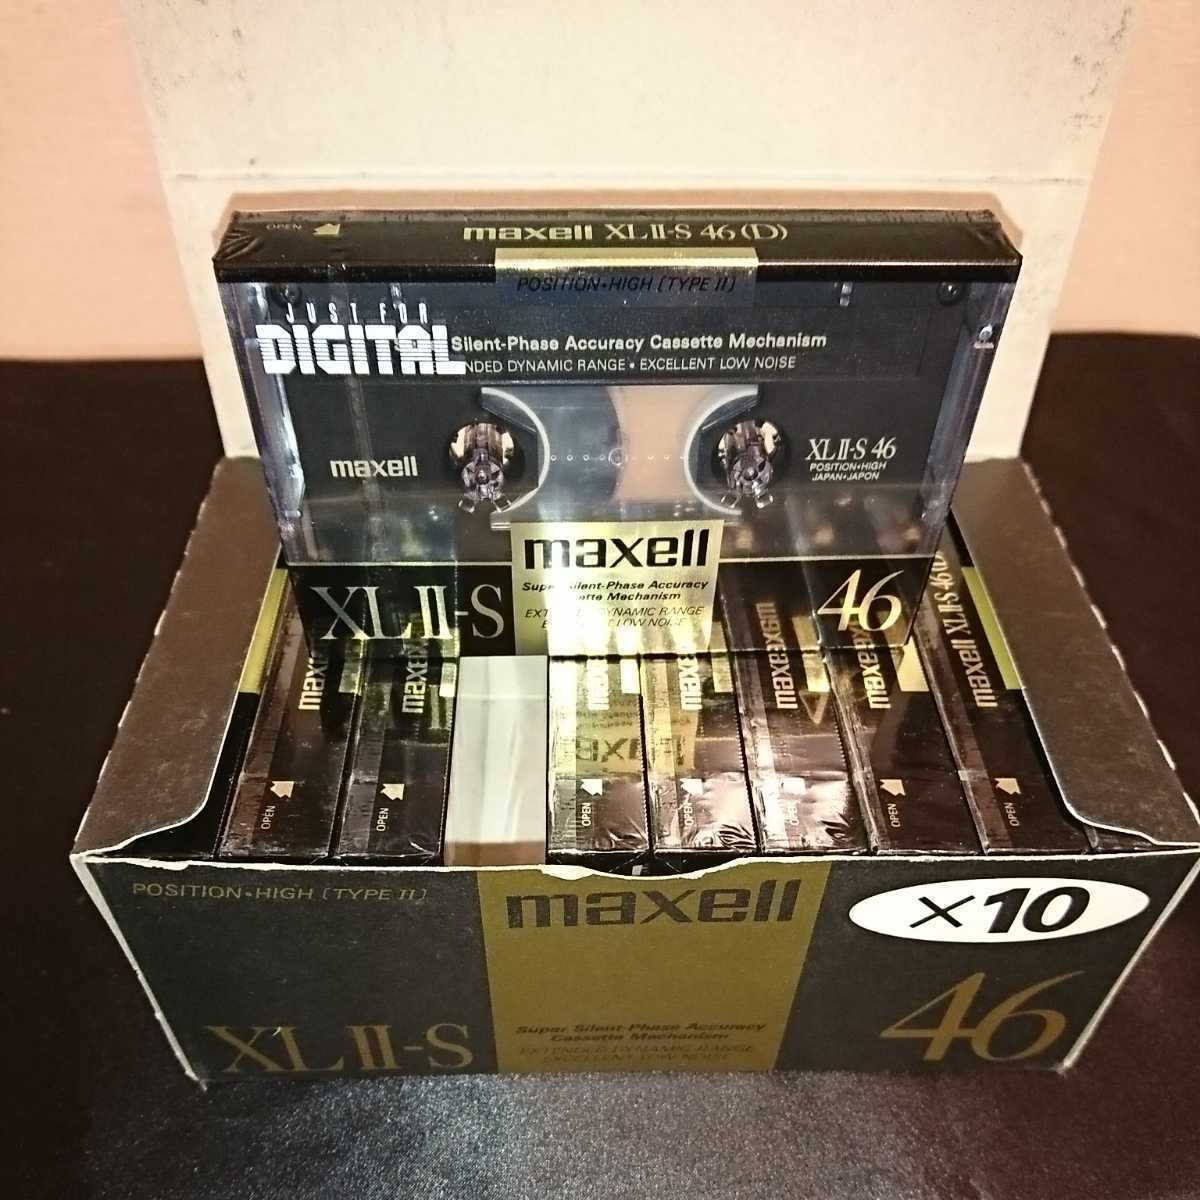 maxell XLⅡ-S46 typeⅡ High position 46 minute [1988 year 3 generation model ] ultra rare [ cassette tape historical highest . work. highest grade model cosmetics box attaching 10ps.@set]